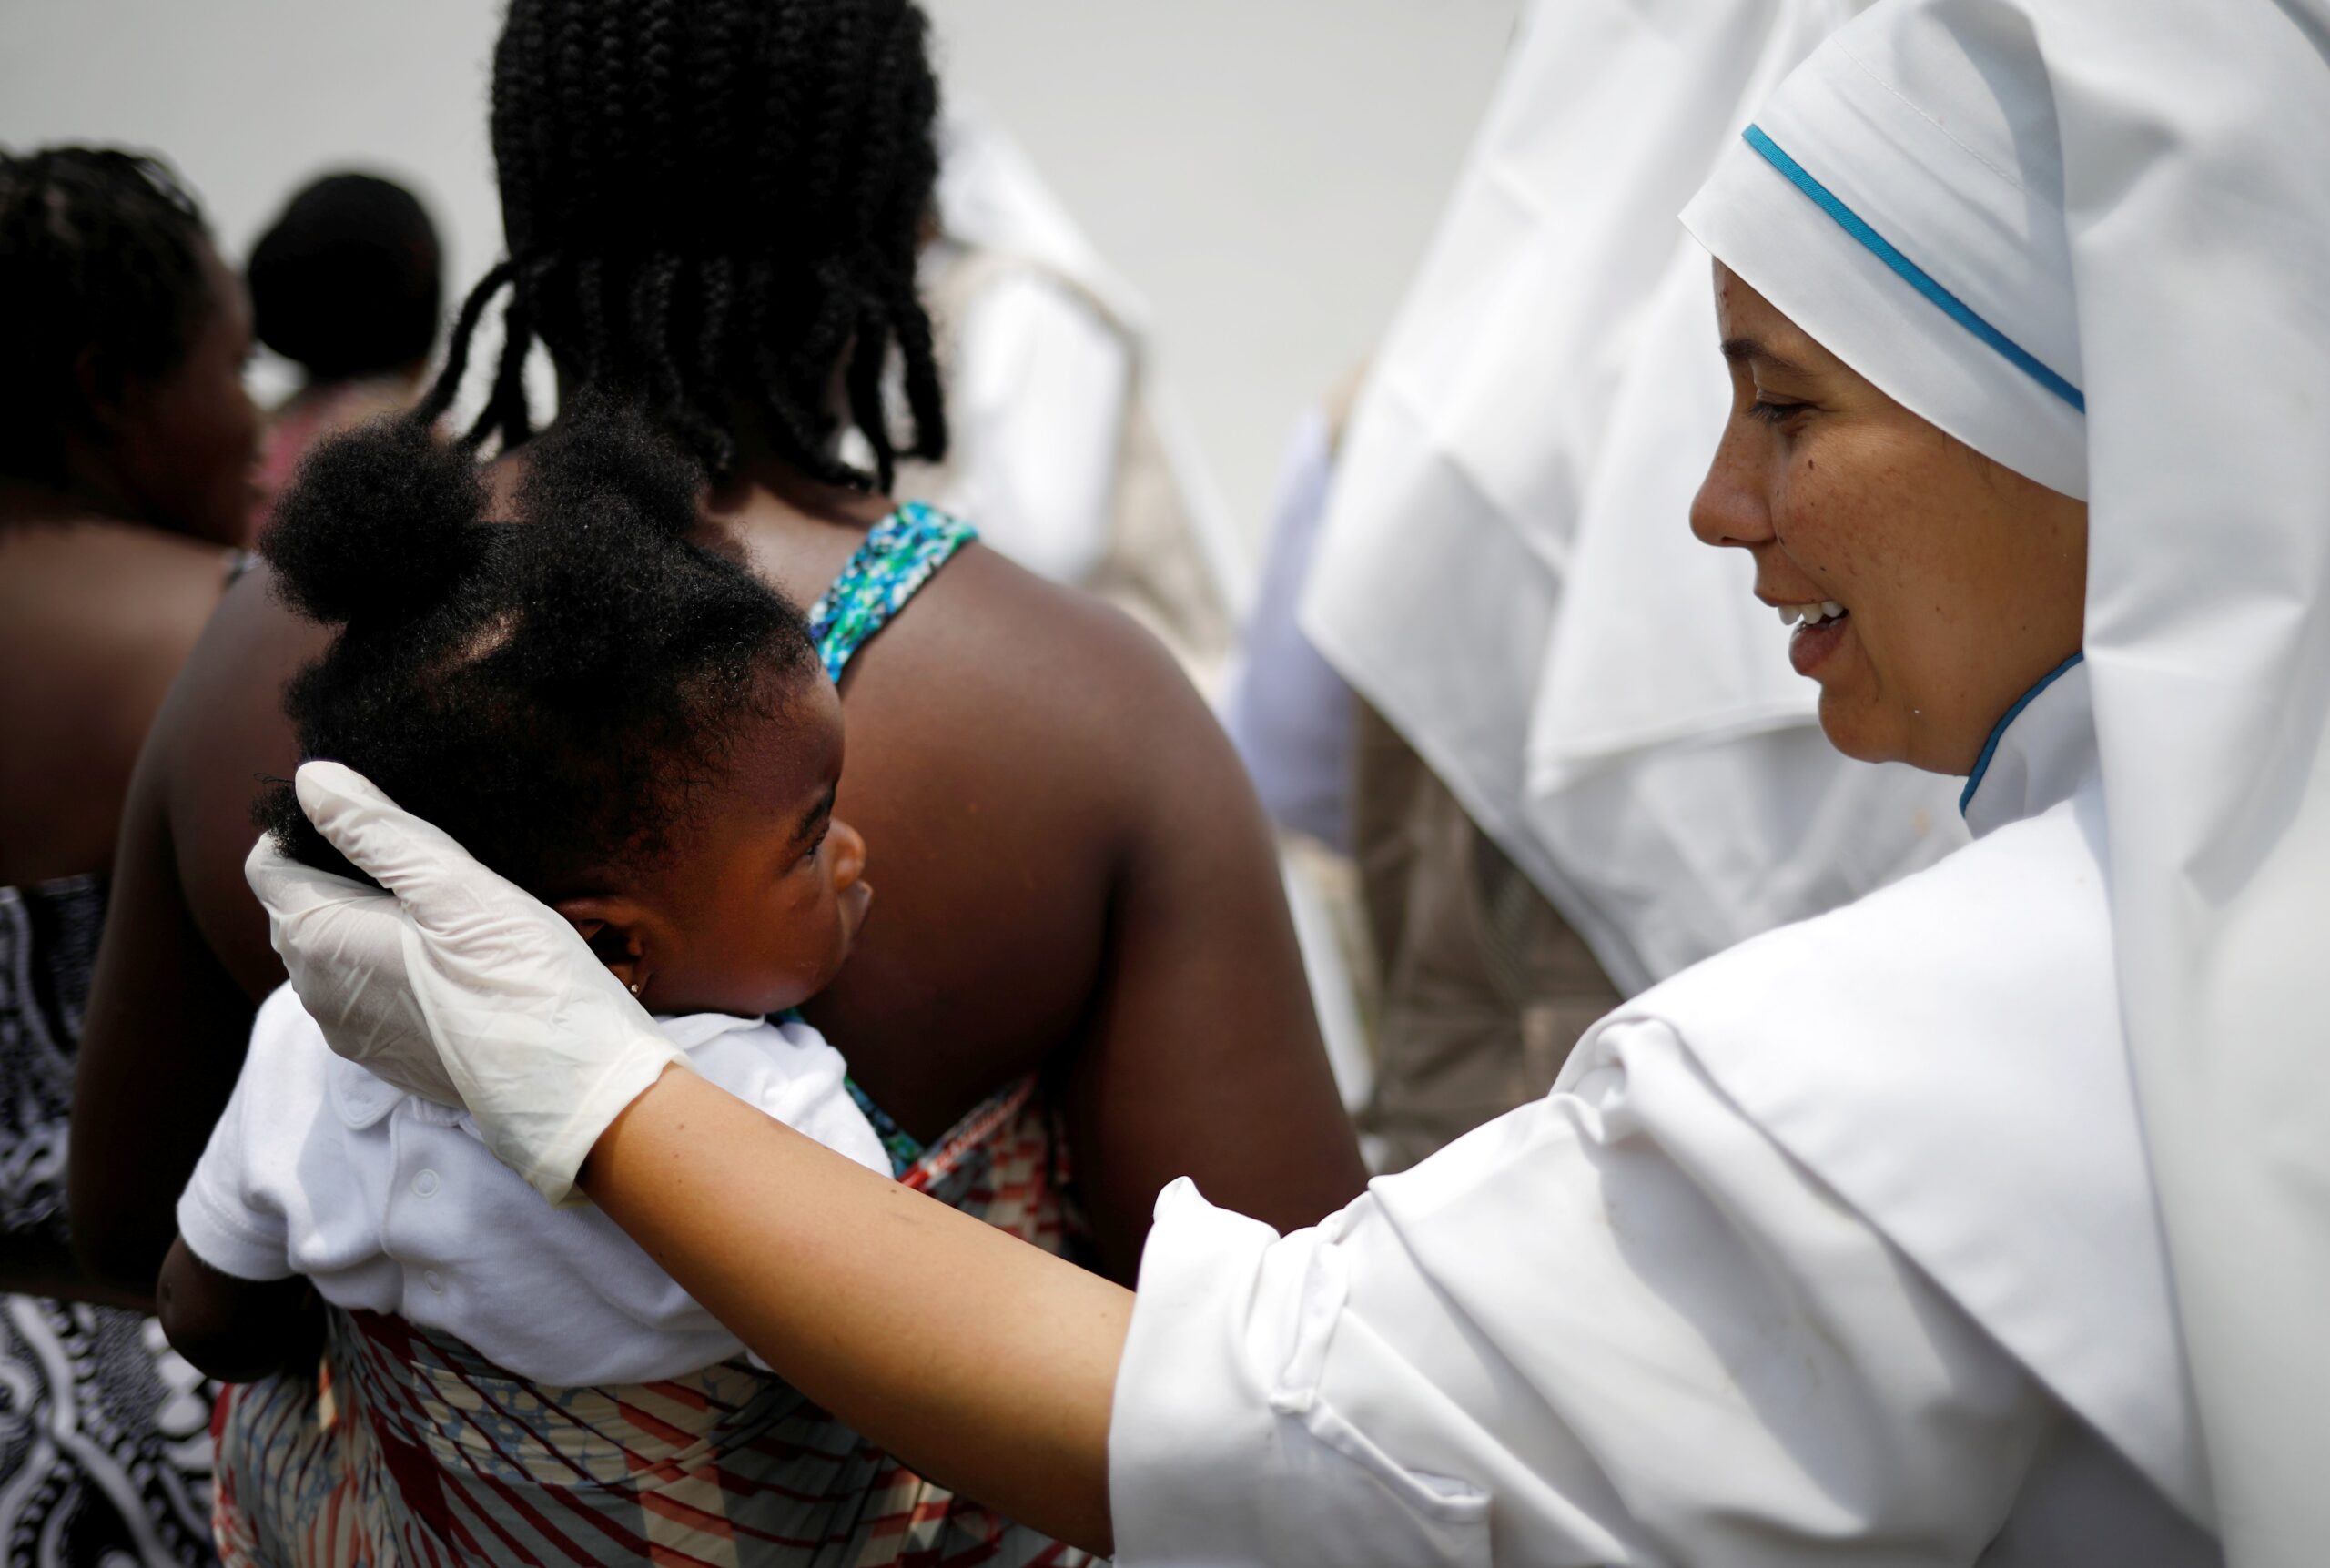 A member of the Missionaries of the Risen Christ comforts a young migrant in Tapachula, Mexico, May 11, 2019. Priests and parishioners in the U.S. Archdiocese of Boston must be "ready and willing to assist" the historic influx of migrants entering Massachusetts, Boston Cardinal Seán P. O’Malley wrote in a letter to parishes Oct. 23, 2023. (OSV News photo/Andres Martinez Casares, Reuters)